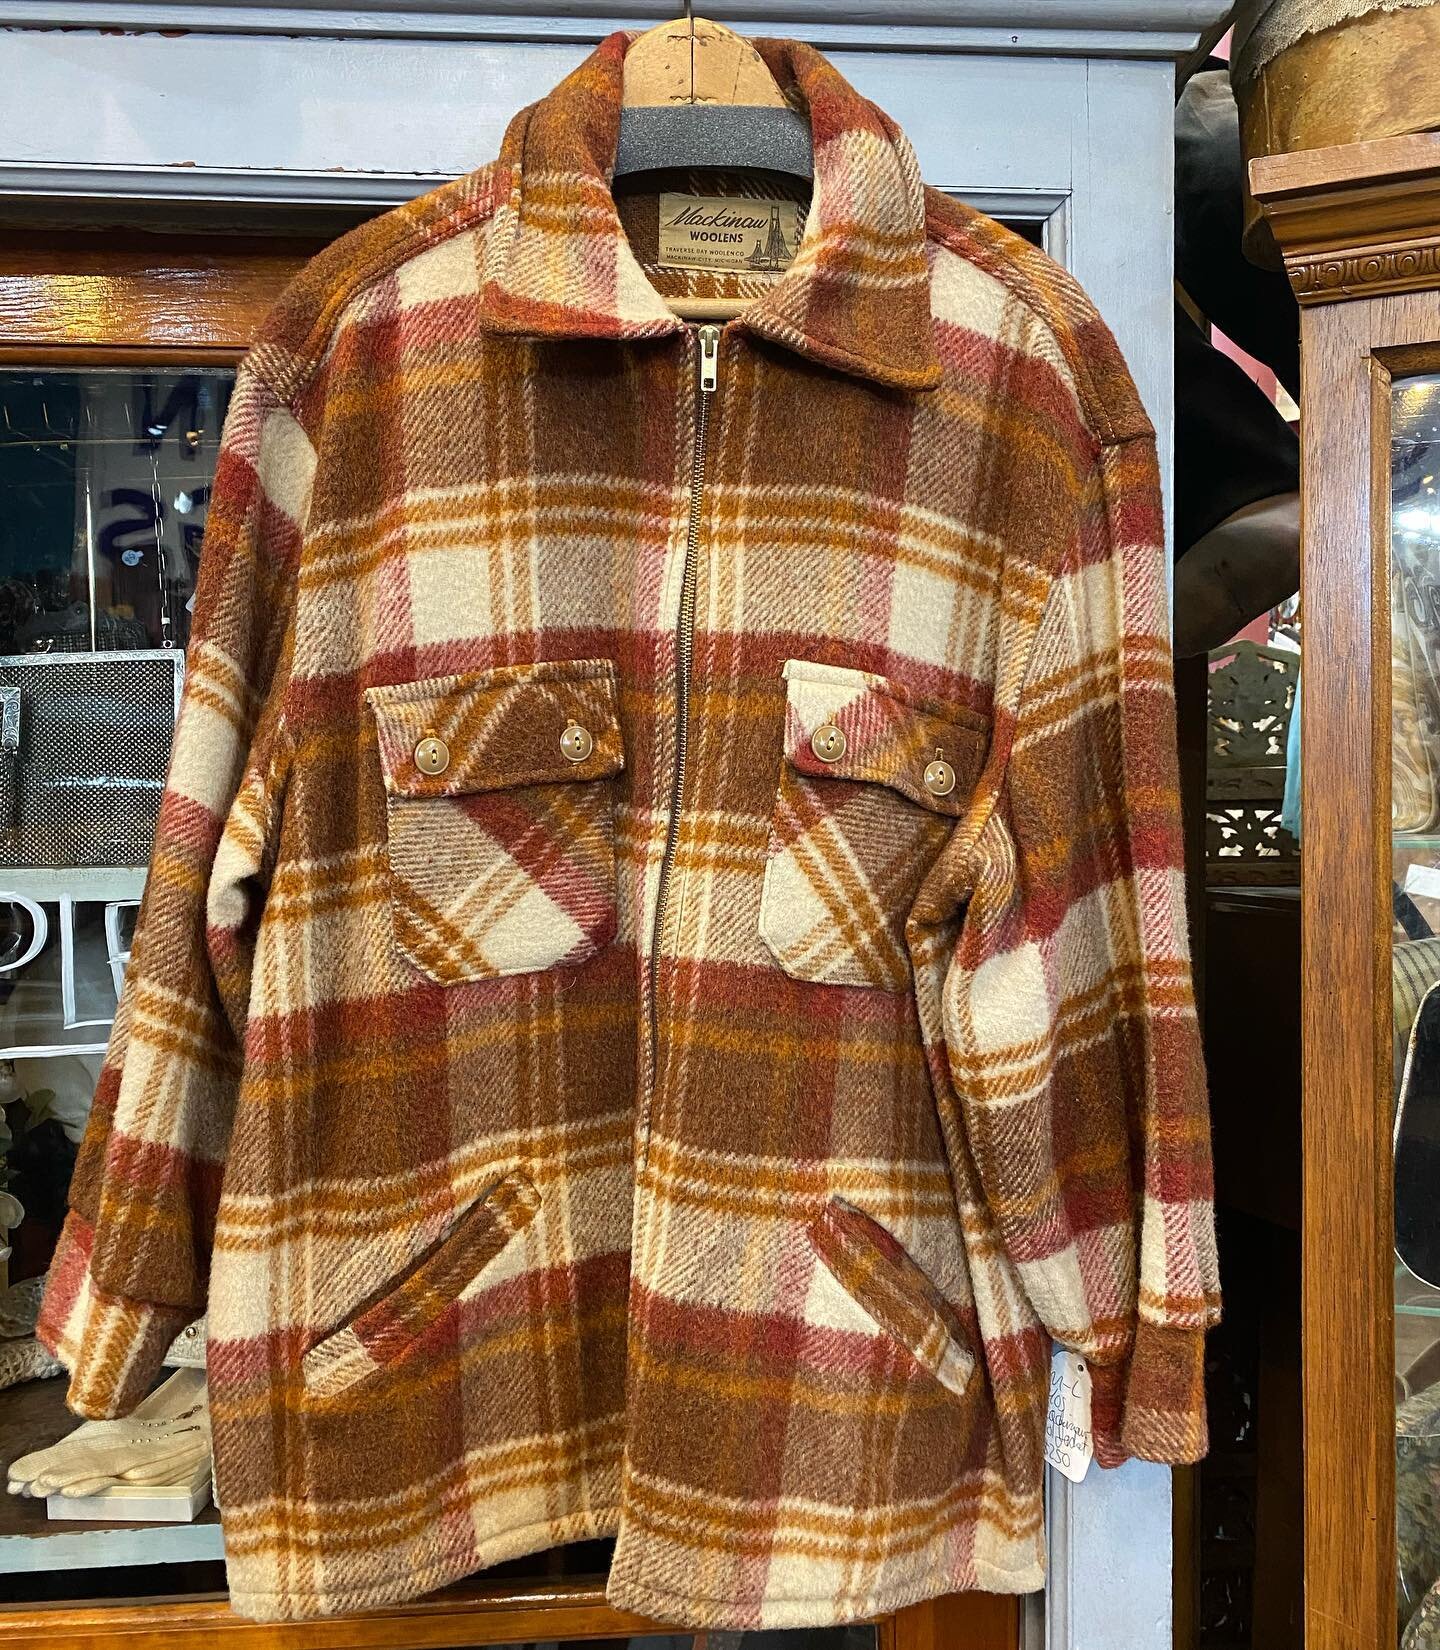 A freshly restored men&rsquo;s 40s Mackinaw Woolen Mills wool jacket. Had a broken zipper which we replaced. In working order, ready to wear. Has a 52&rdquo; chest! Asking $250 🤎🤎🤎🧡🧡🧡 DM to purchase! #mackinaw #wool #plaid #mensvintage